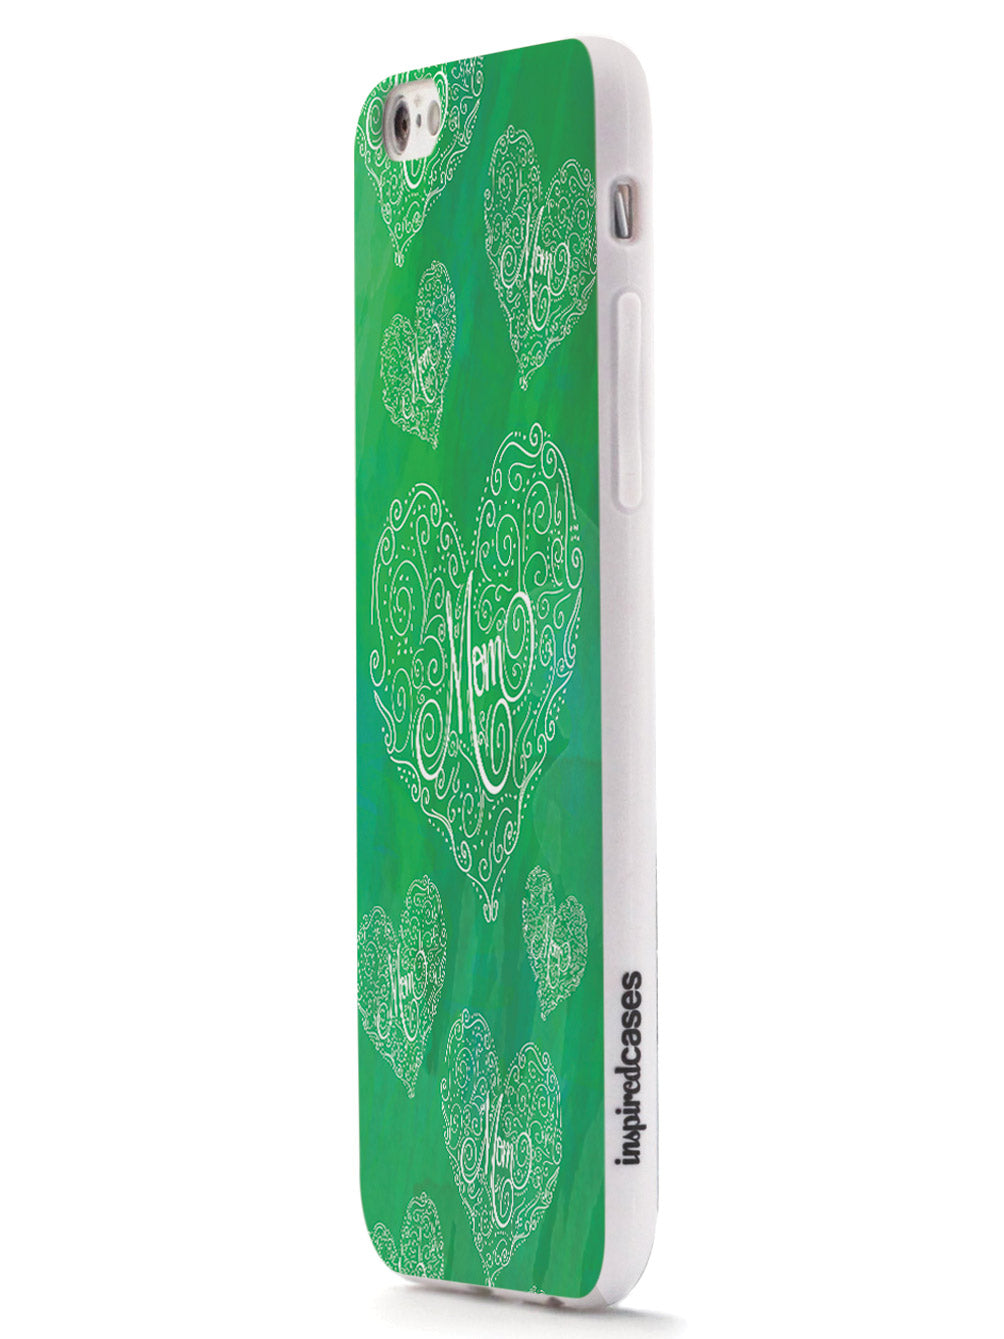 Mom Doodle Hearts - Green Case